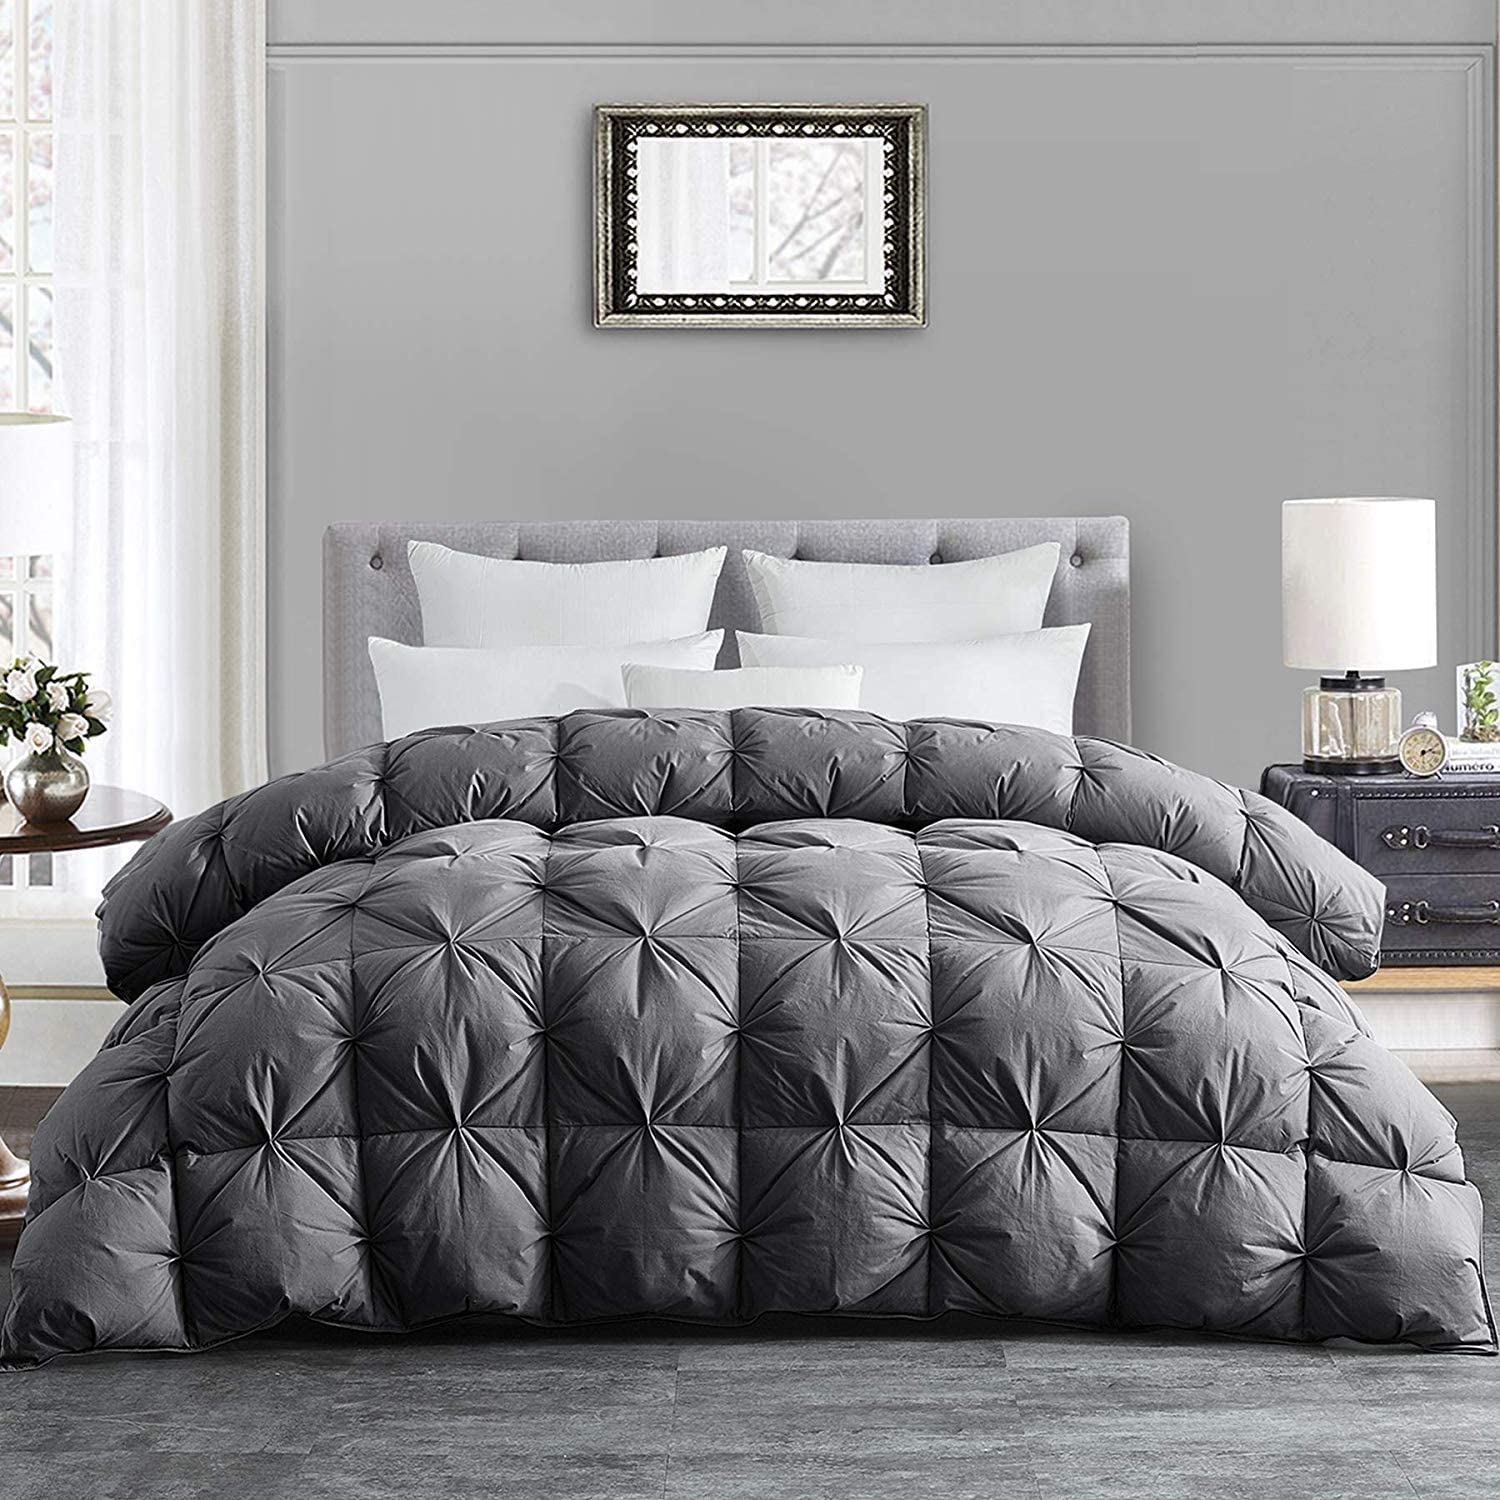 Hombys California King Size Goose Down, Can You Use King Size Bedding On A California